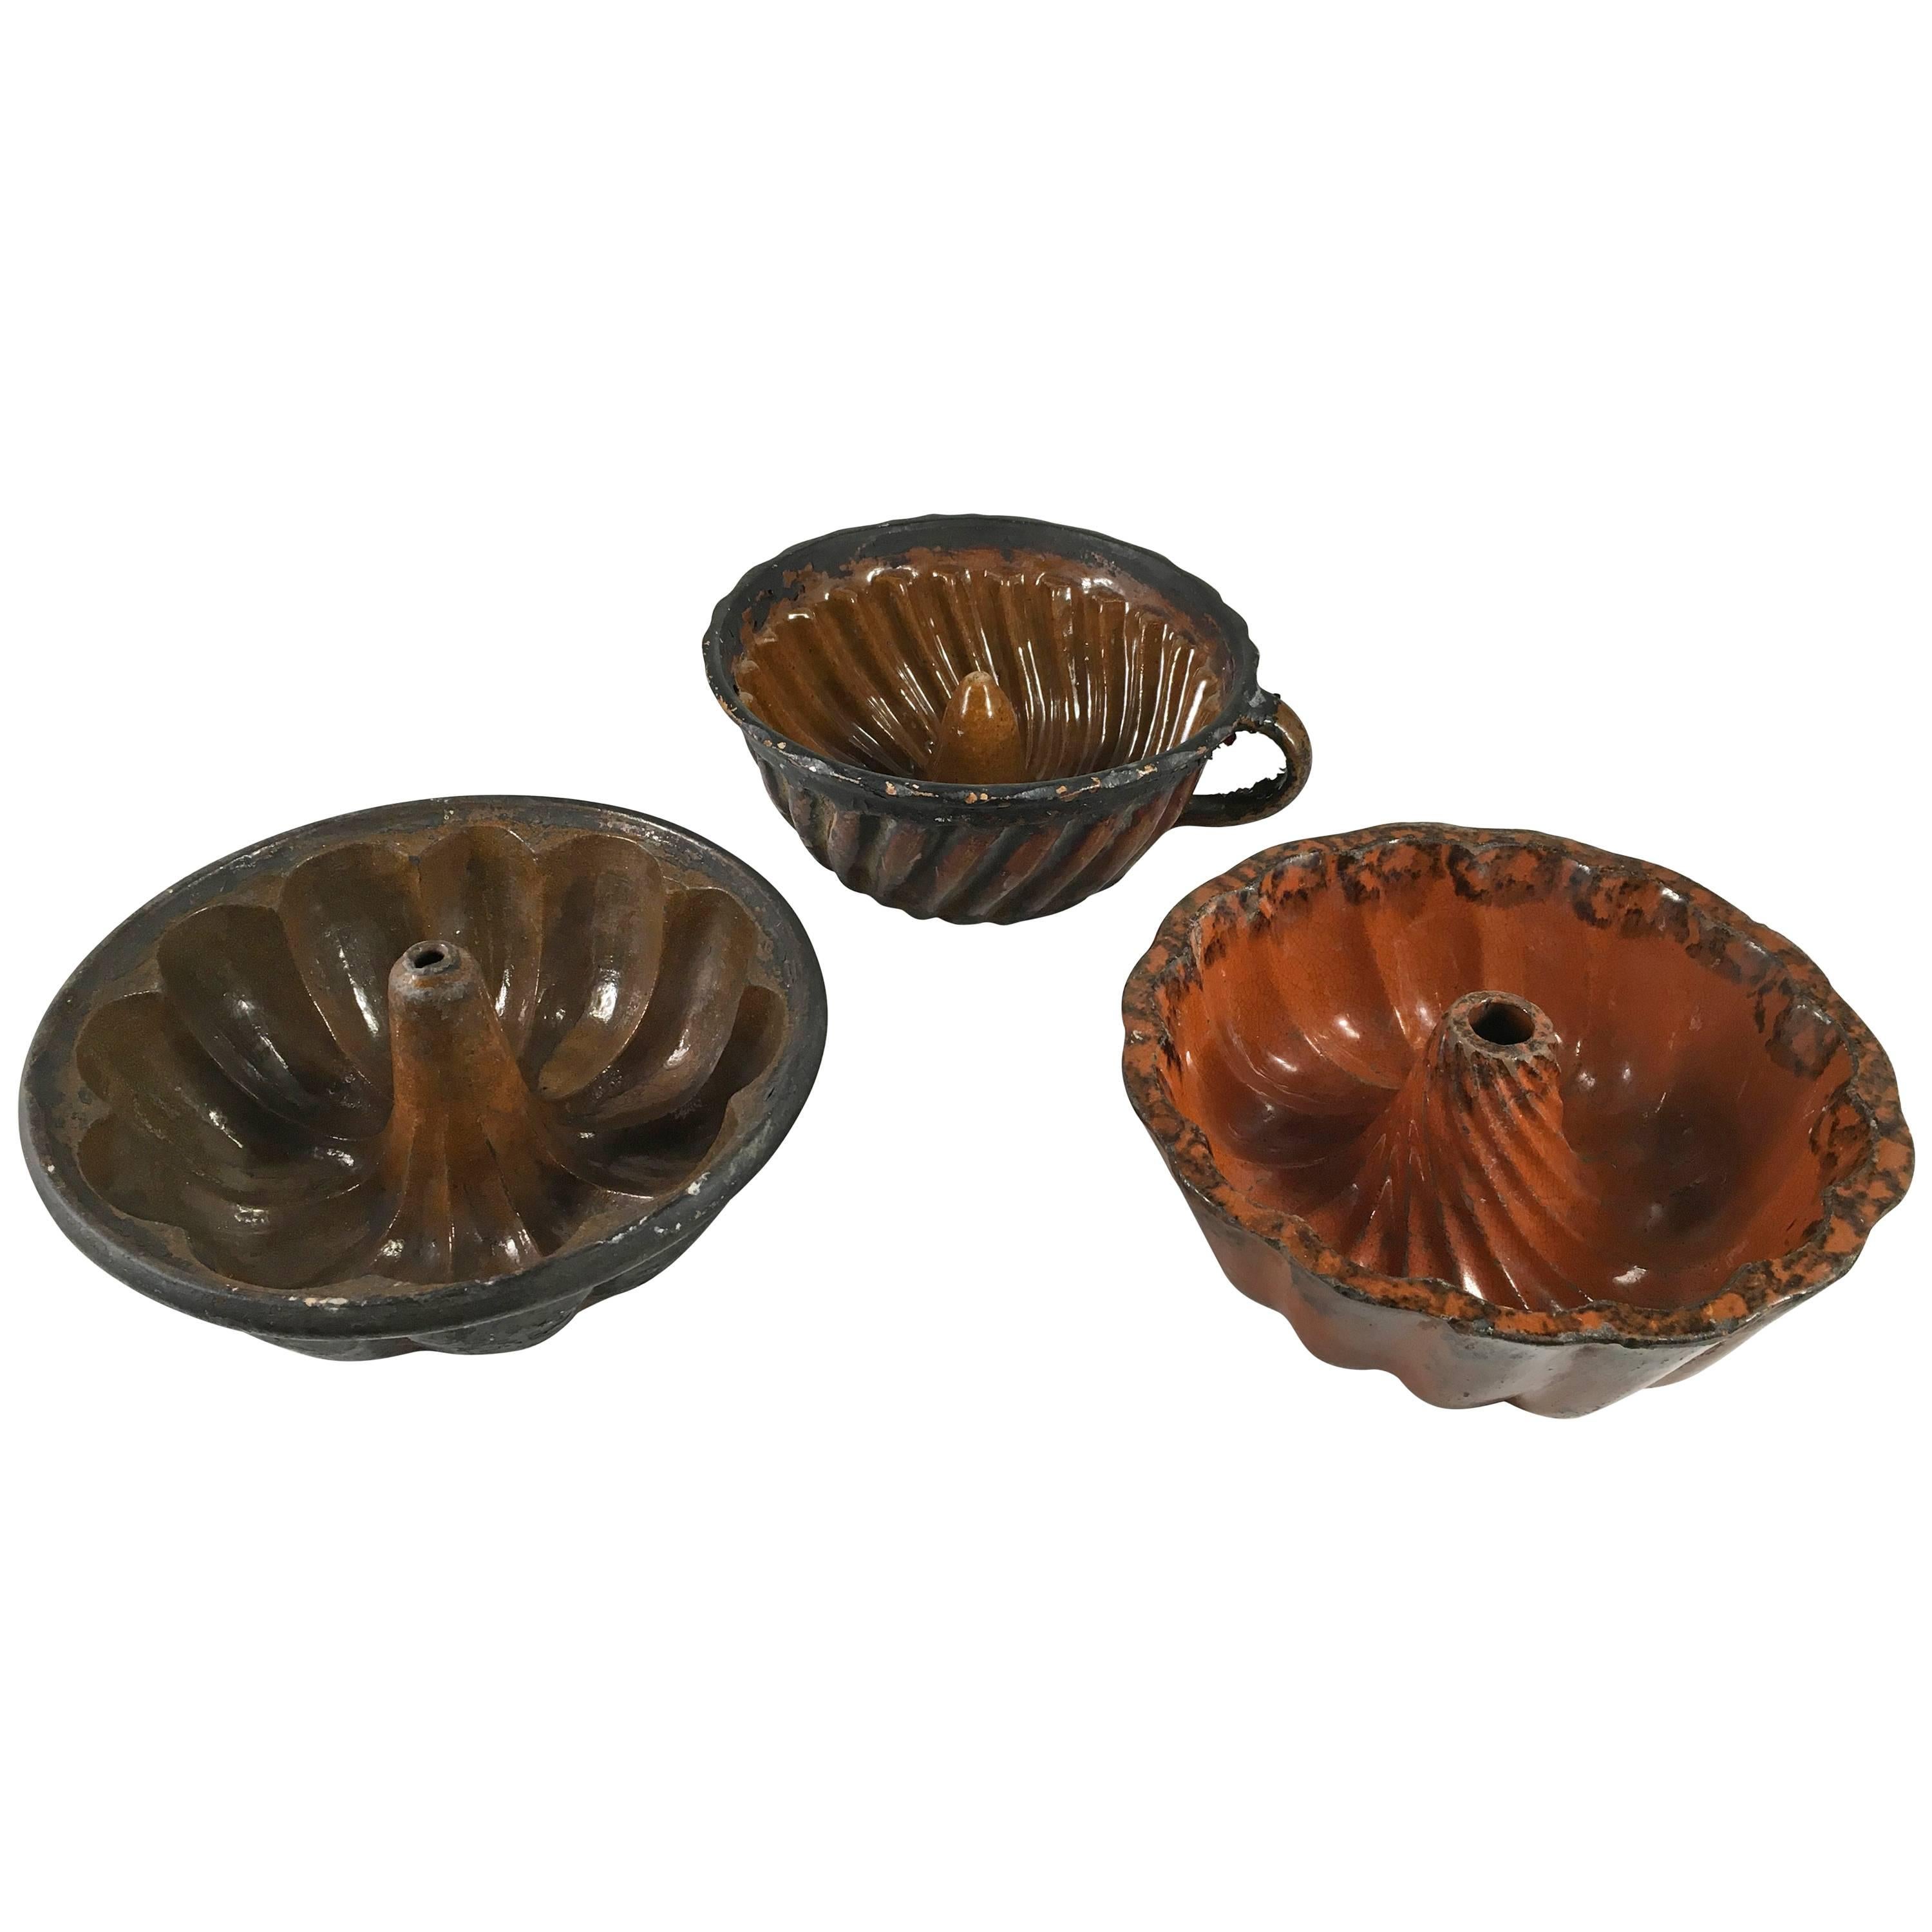 Collection of Three Early Pennsylvania Redware Cake Molds, 19th Century